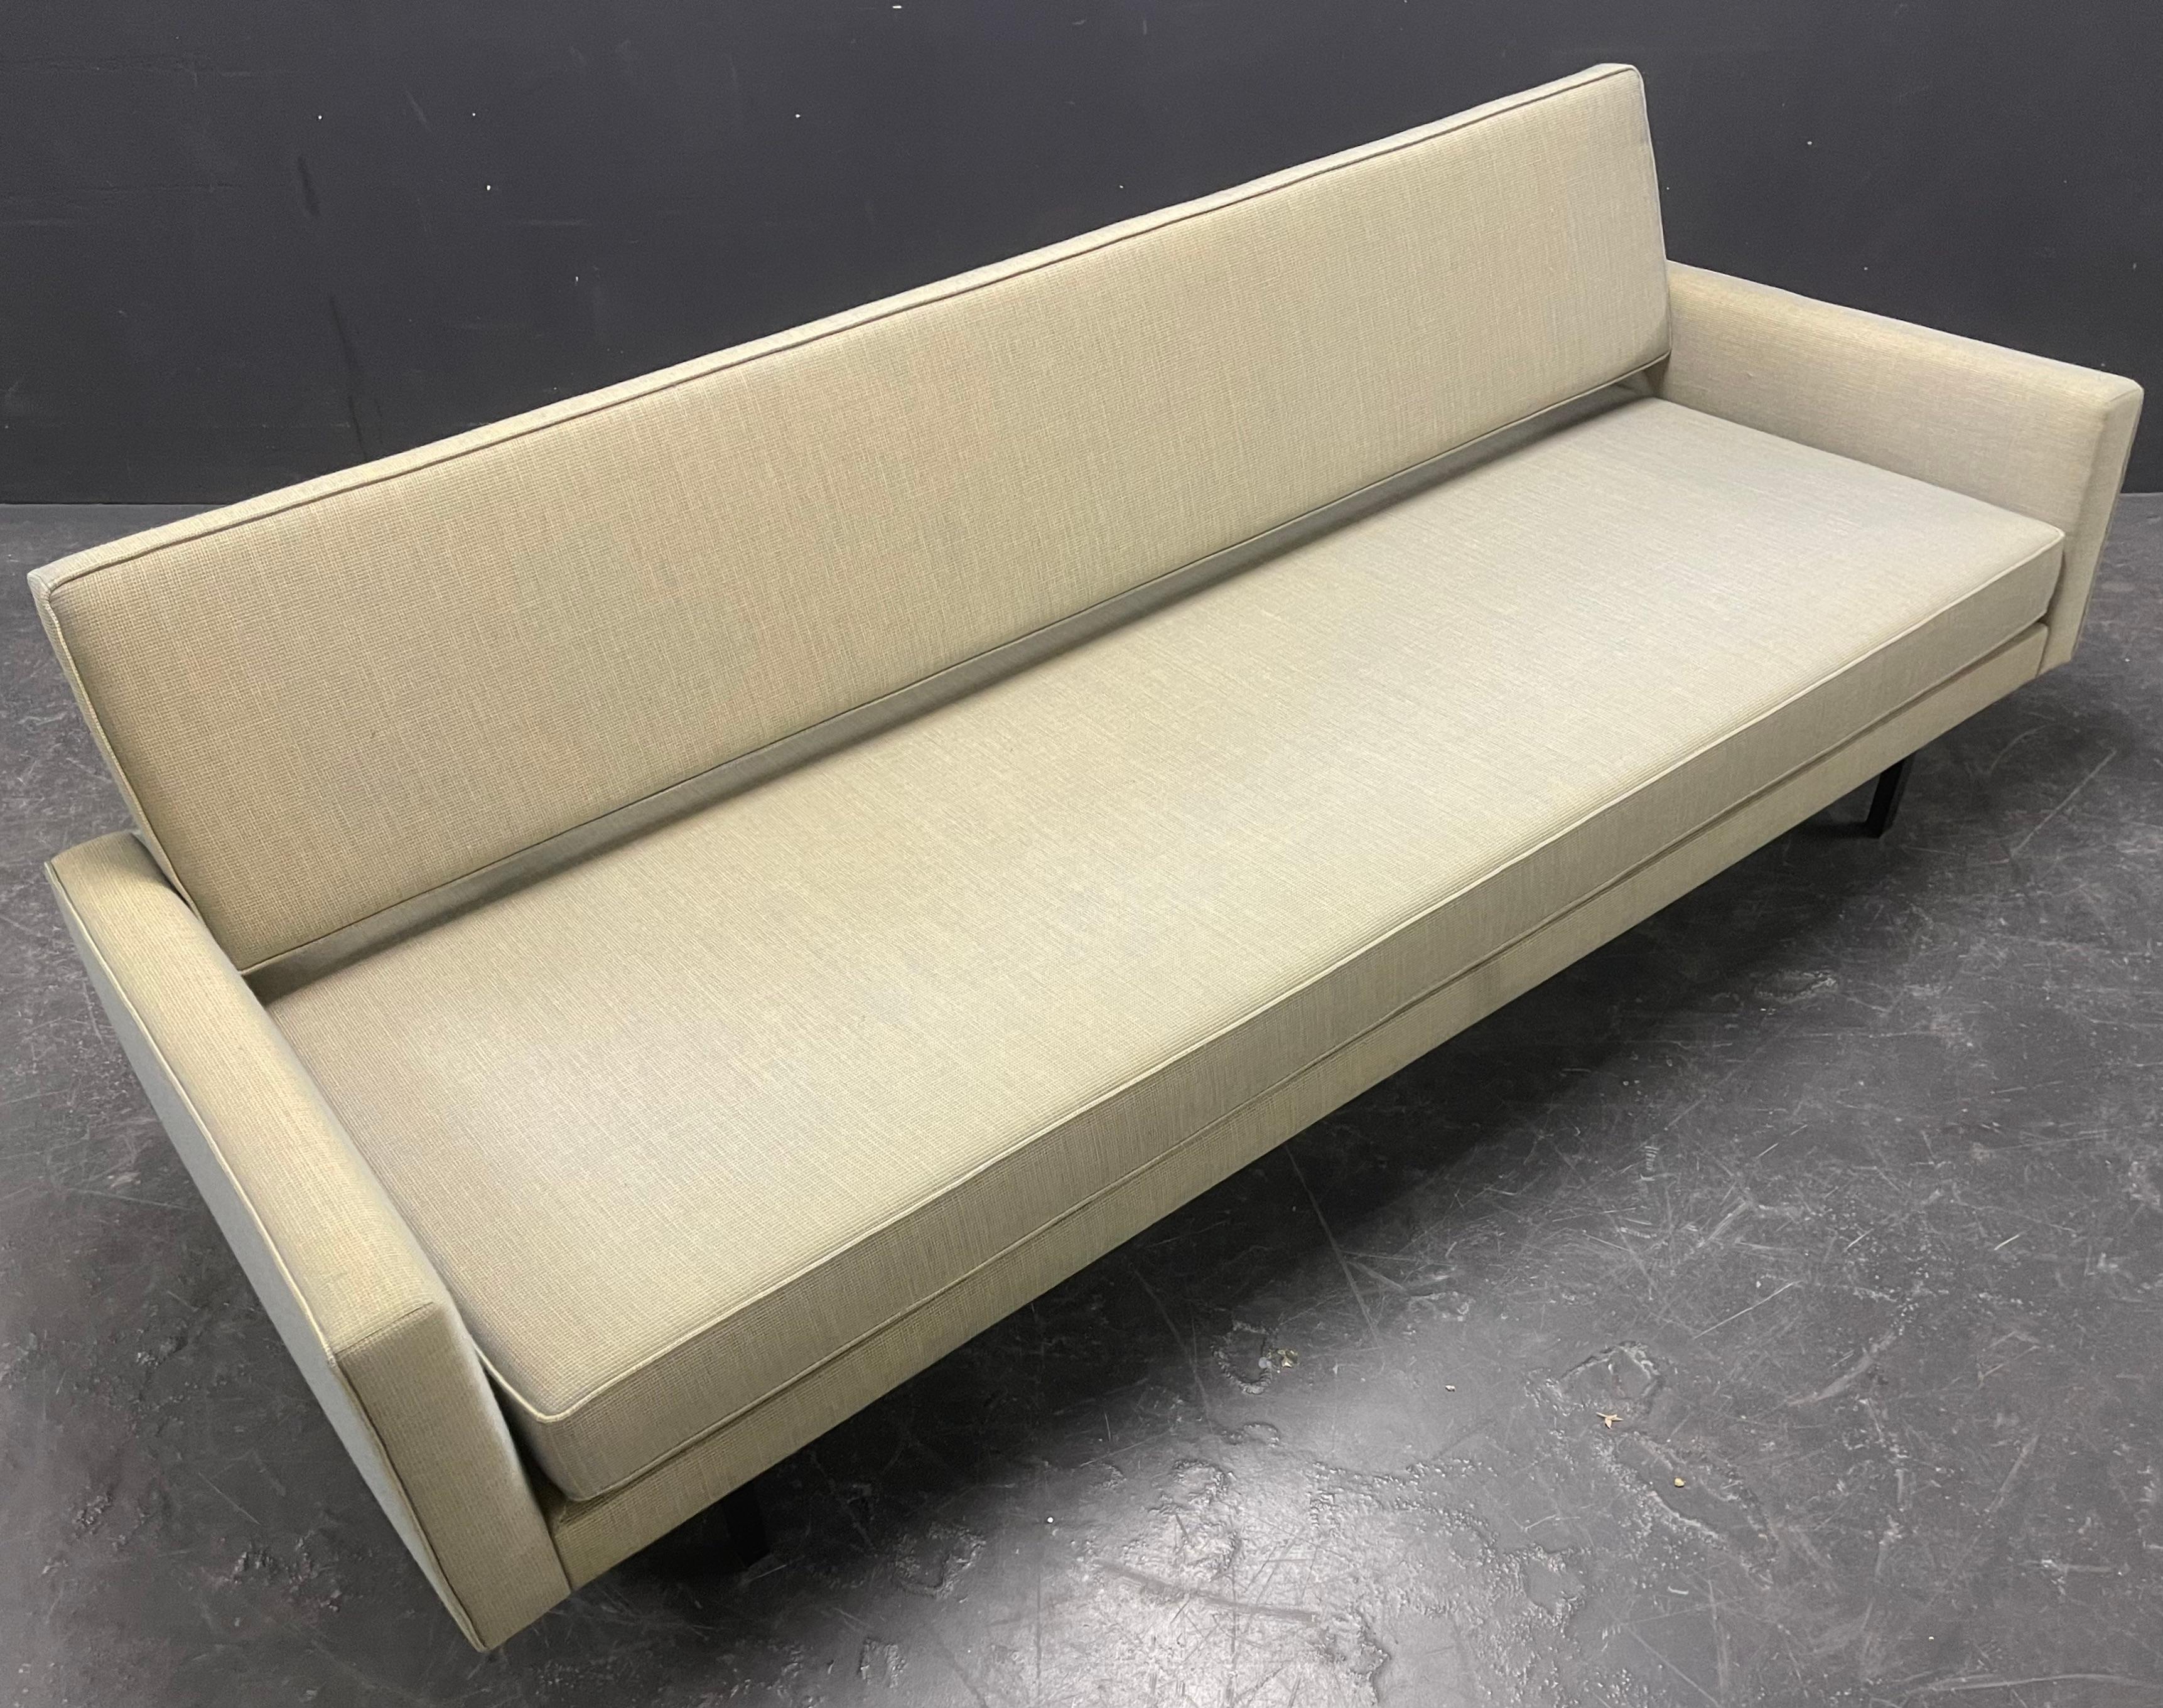 Rare No. 704 Richard Schultz Knoll International Daybed / Sofa For Sale 11